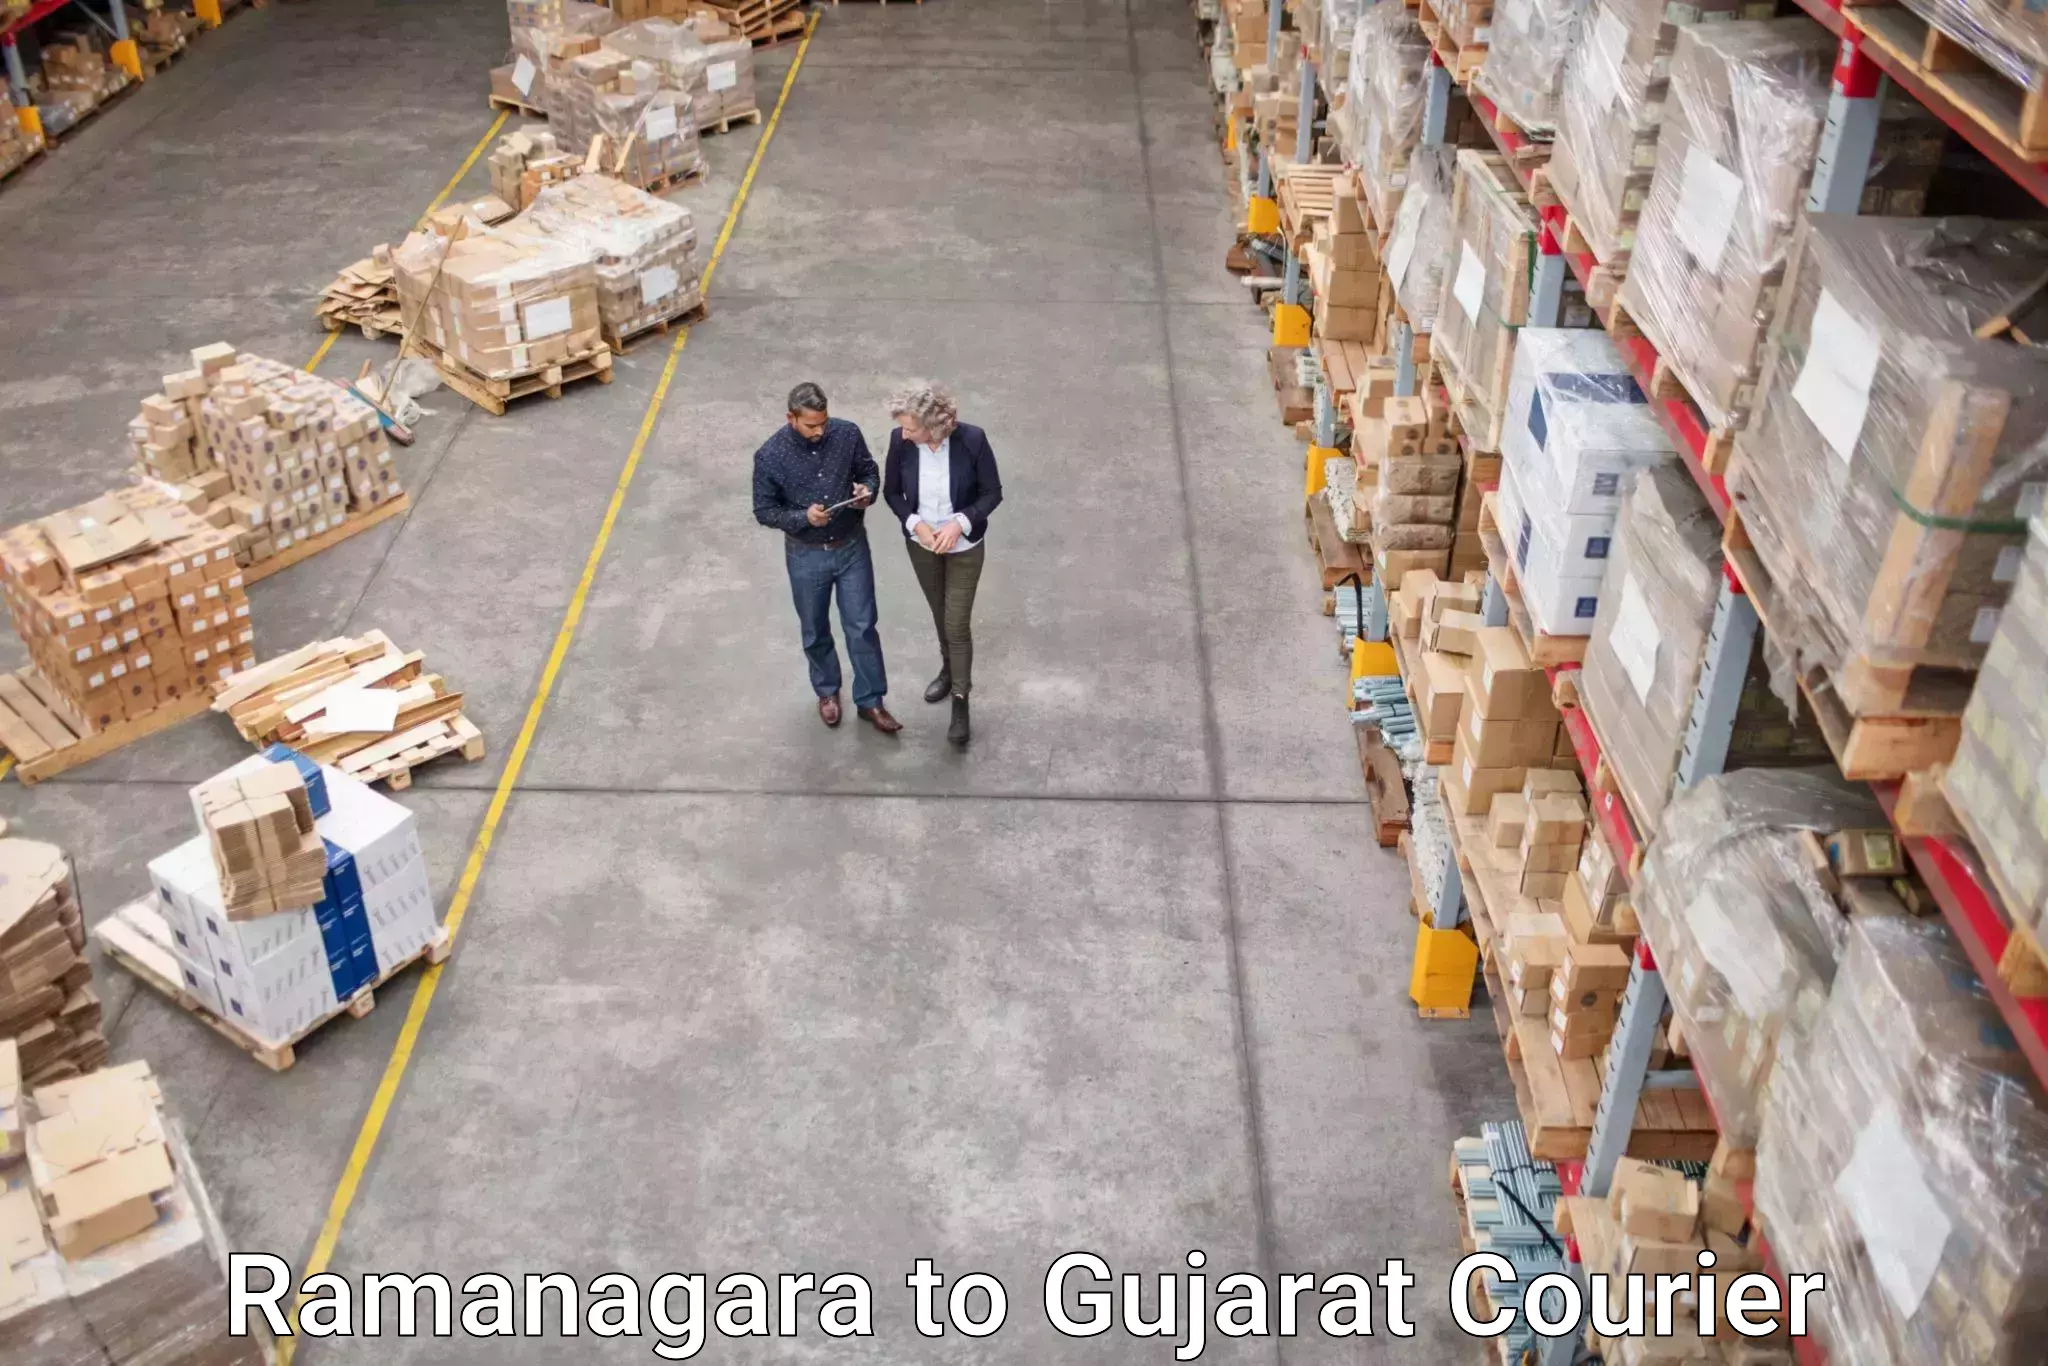 Reliable logistics providers Ramanagara to Anand Agricultural University